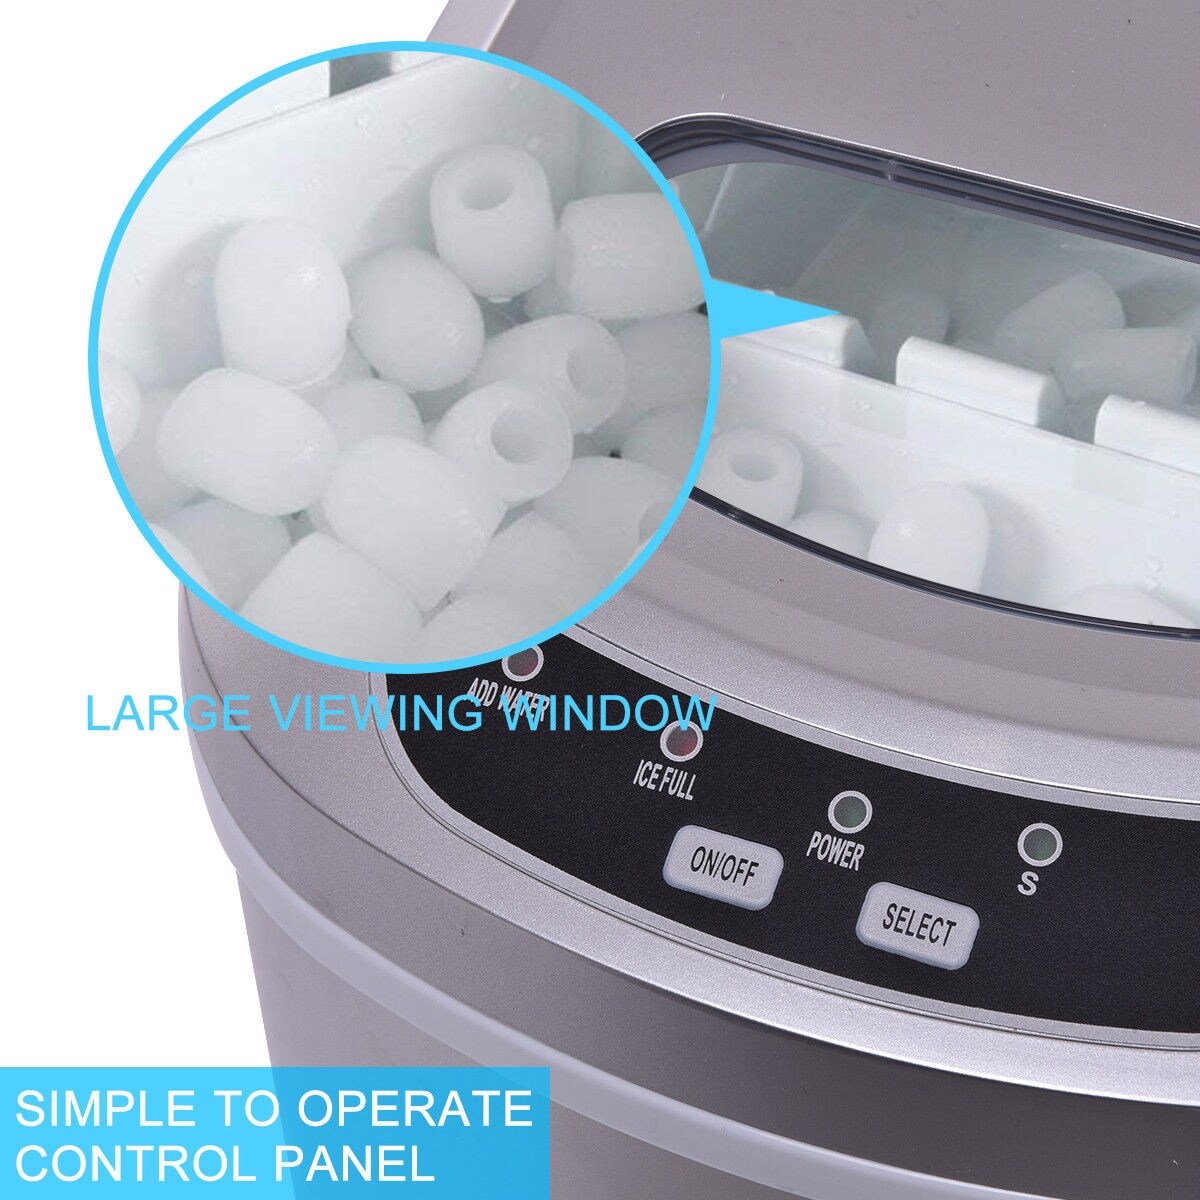 Costway Silver Portable Compact Electric Ice Maker Machine Mini Cube - Bed  Bath & Beyond - 22349507